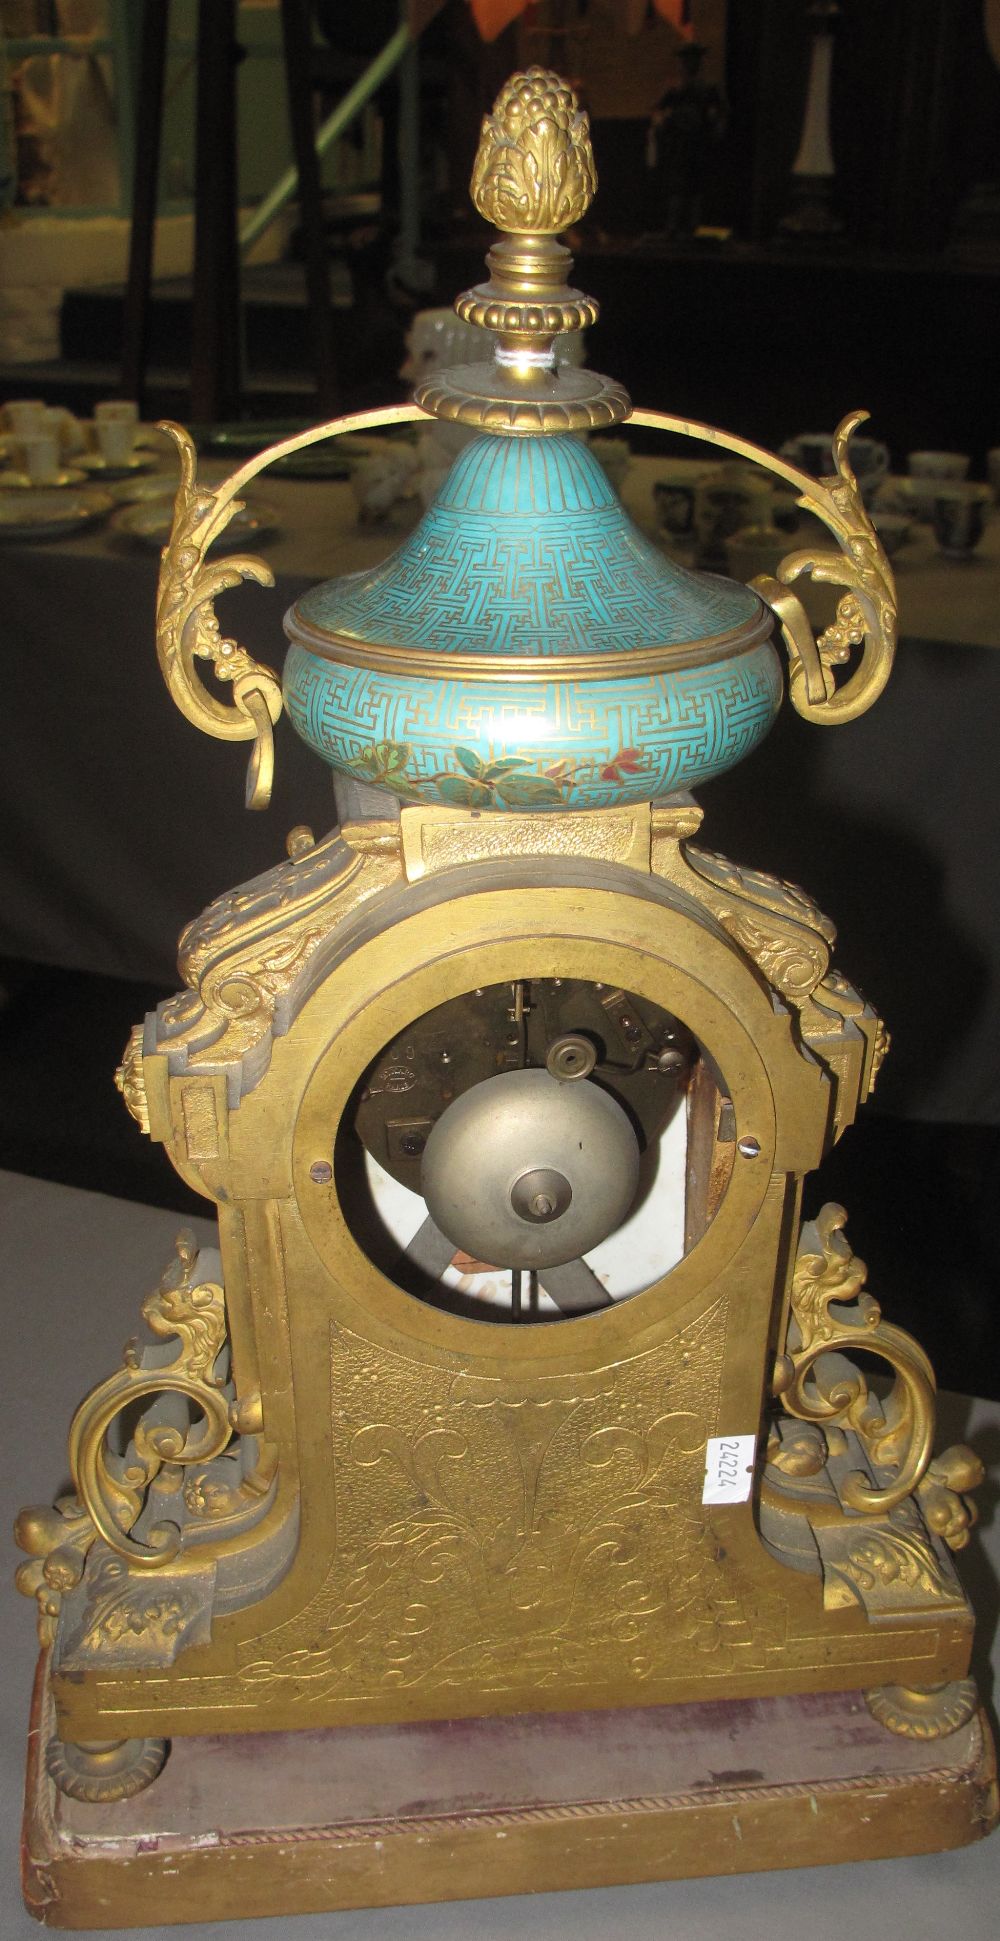 19TH CENTURY FRENCH ORMOLU TWO TRAIN MANTEL CLOCK in classical design with porcelain urn shaped - Image 4 of 7